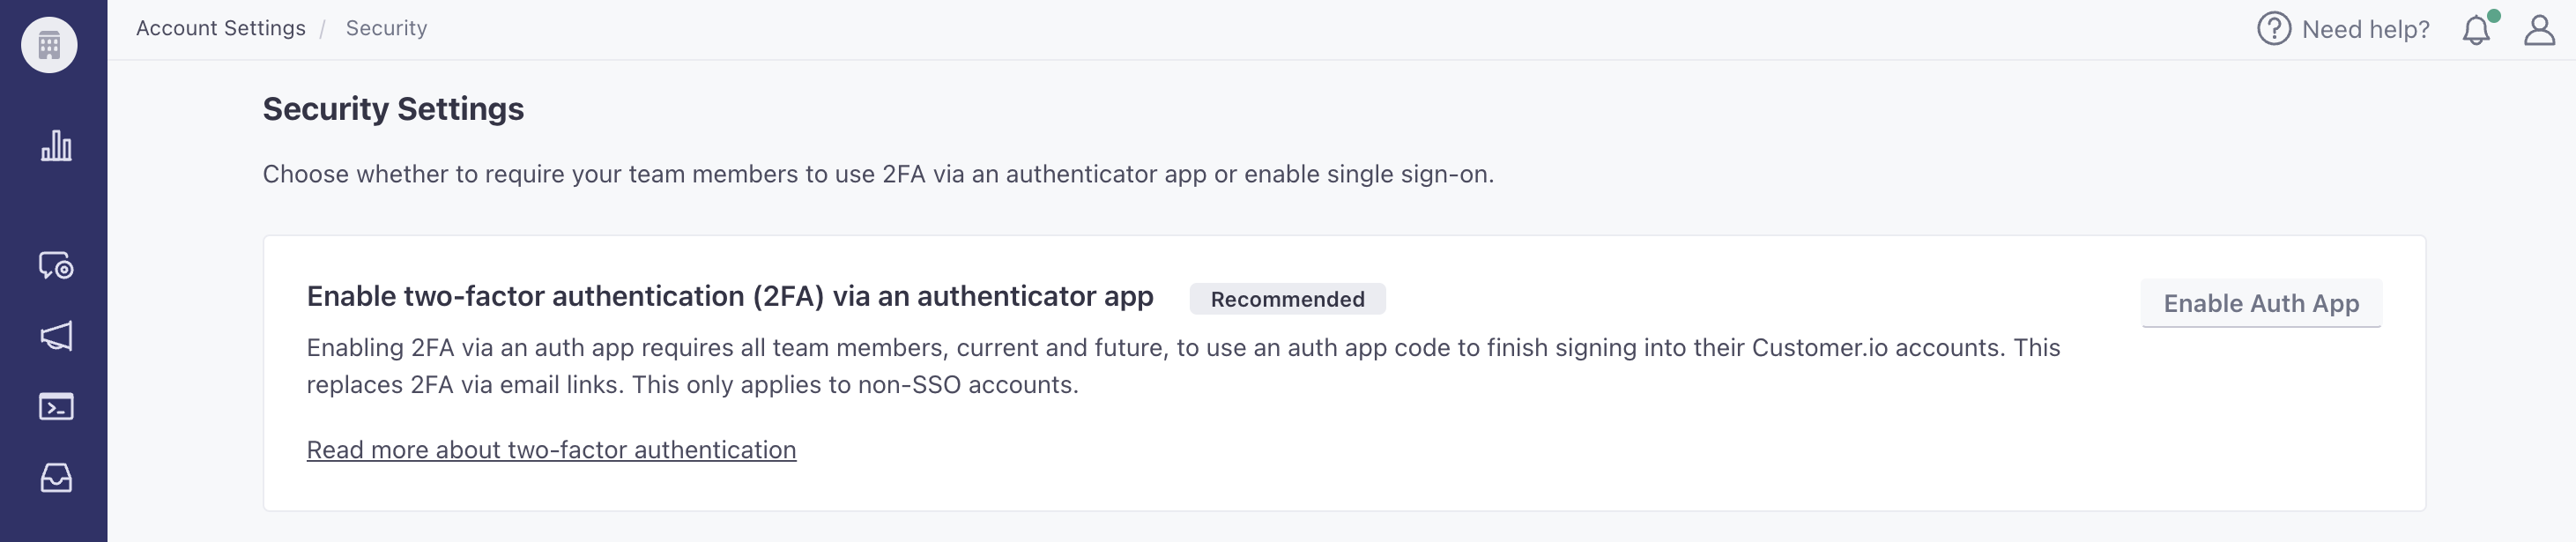 On the Security page, the first item reads: enable two-factor authentication (2FA) via an authenticator app. To the right is a button to enable this. It is disabled until an admin starts to use it on their own account.